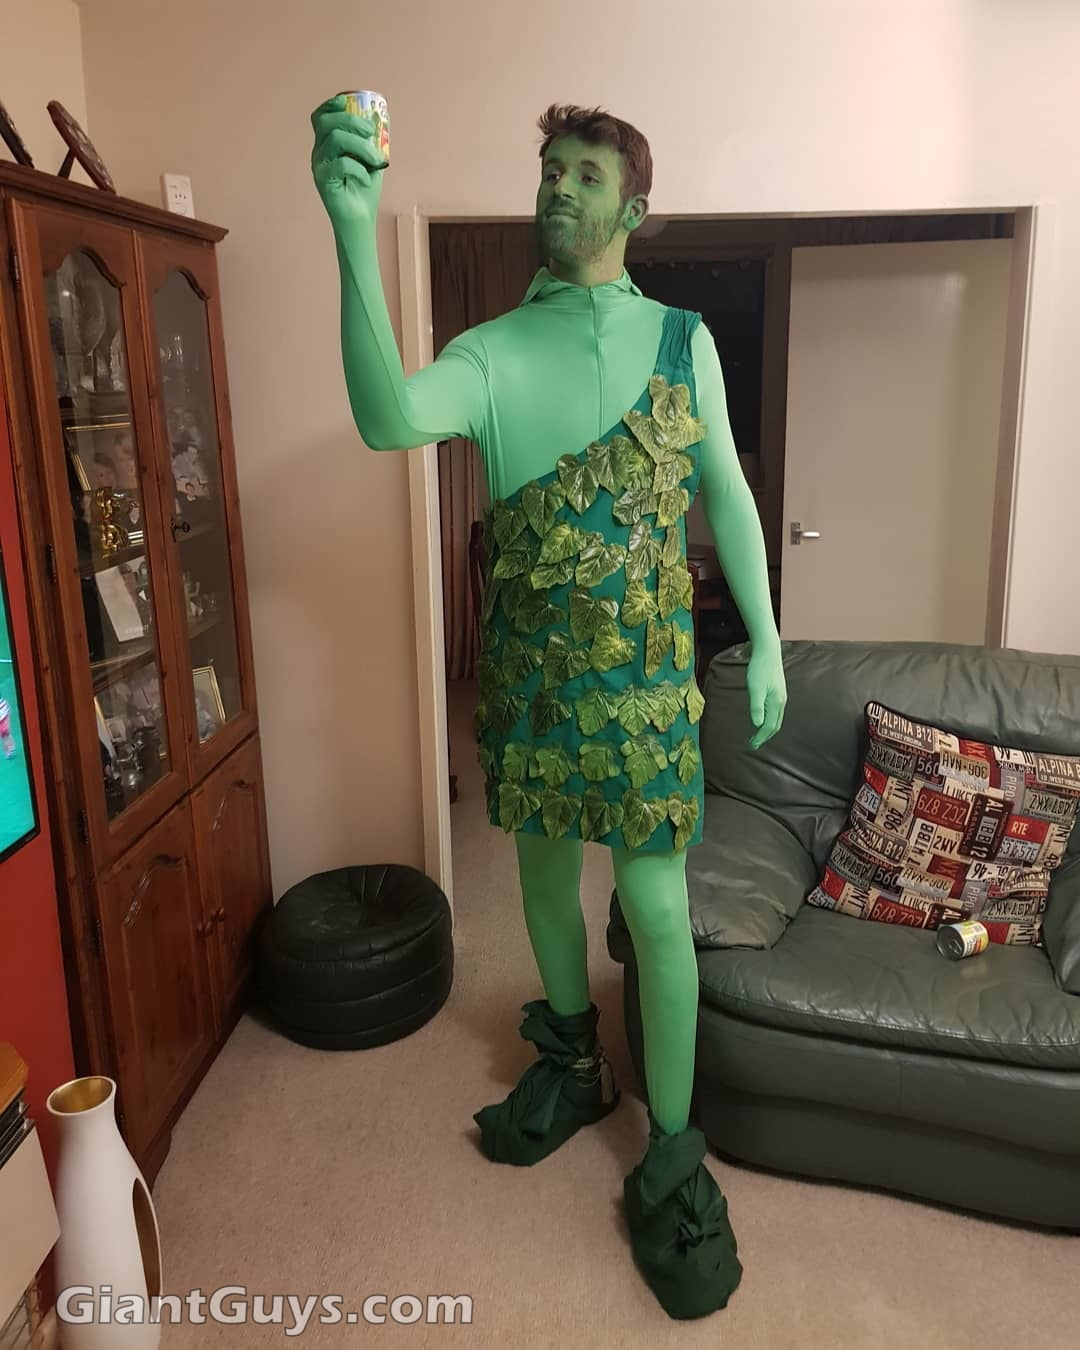 Tall Guy Costume - Green Giant